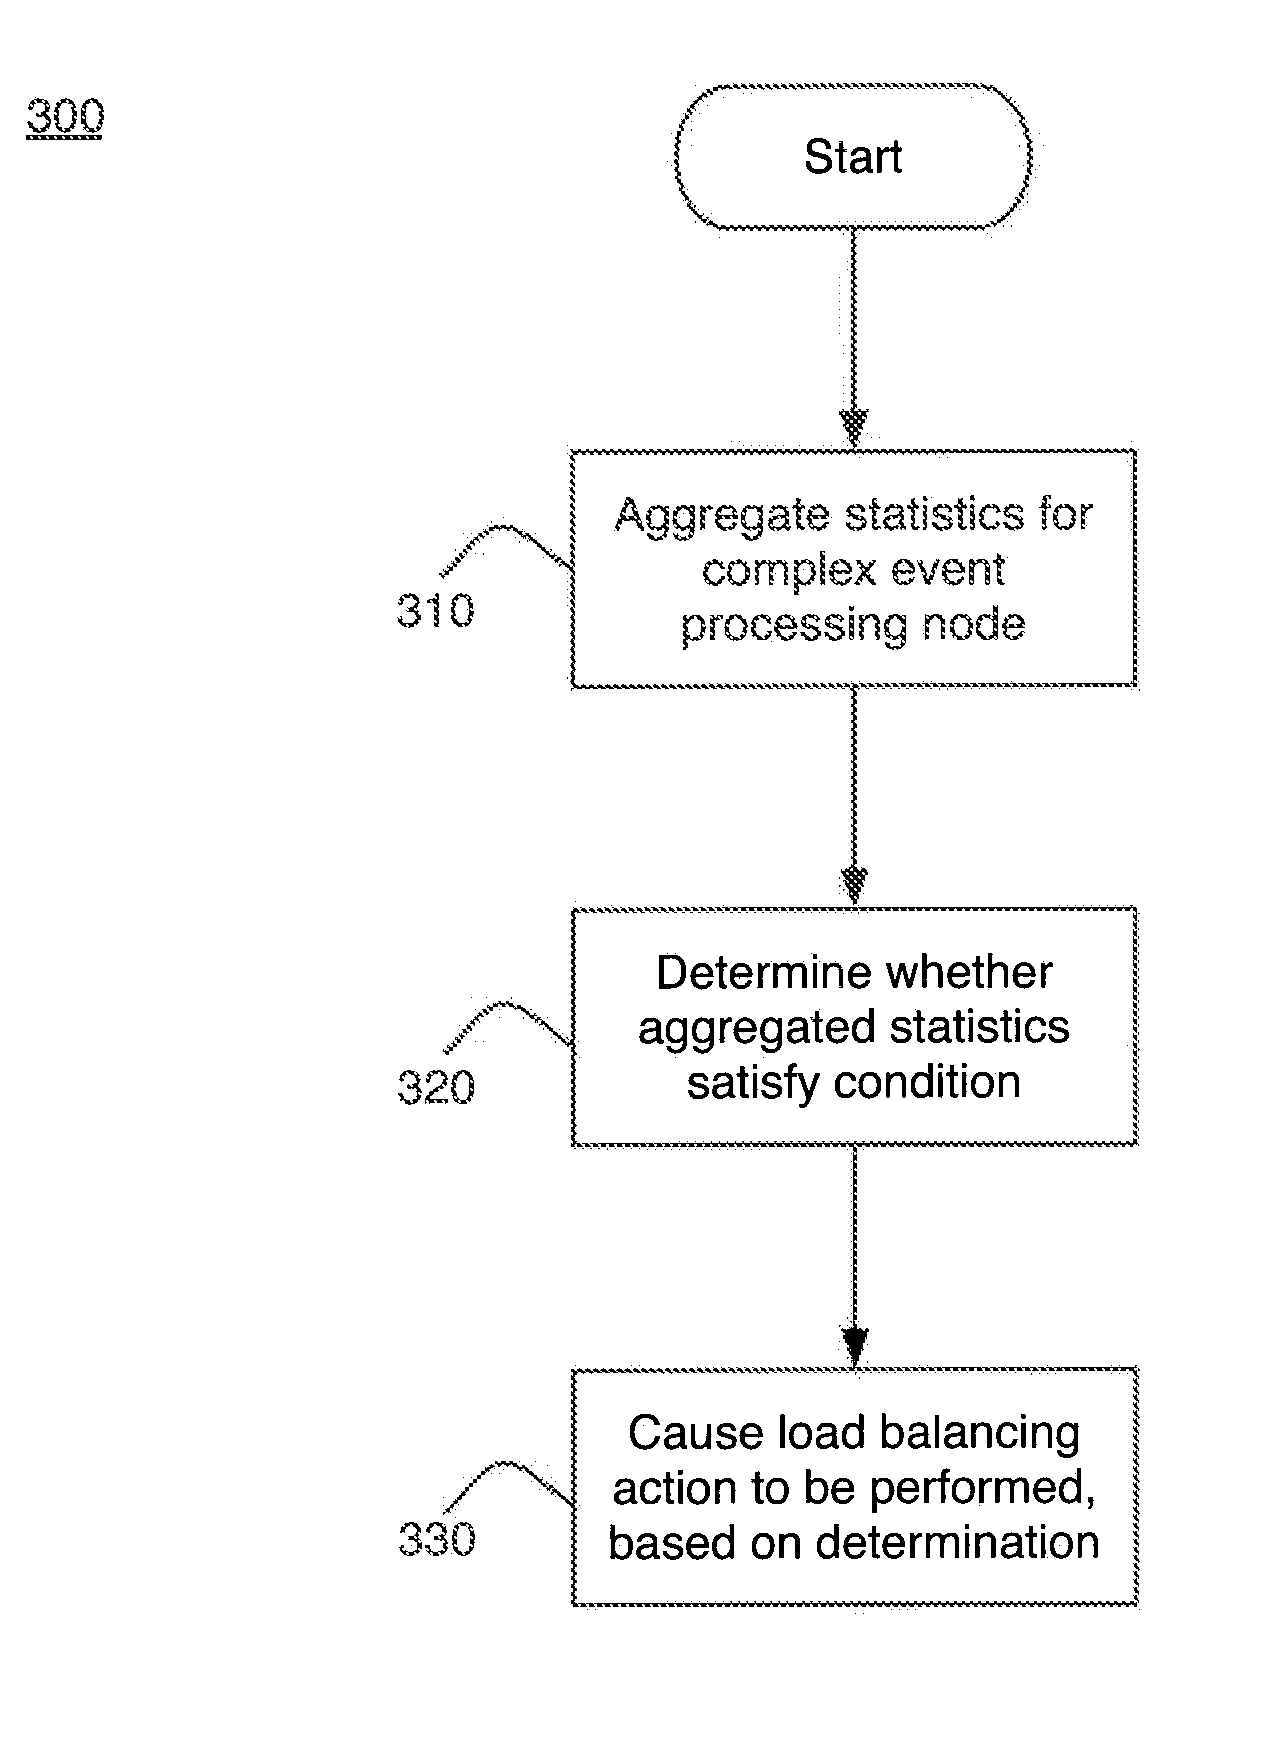 Dynamic Load Balancing for Complex Event Processing